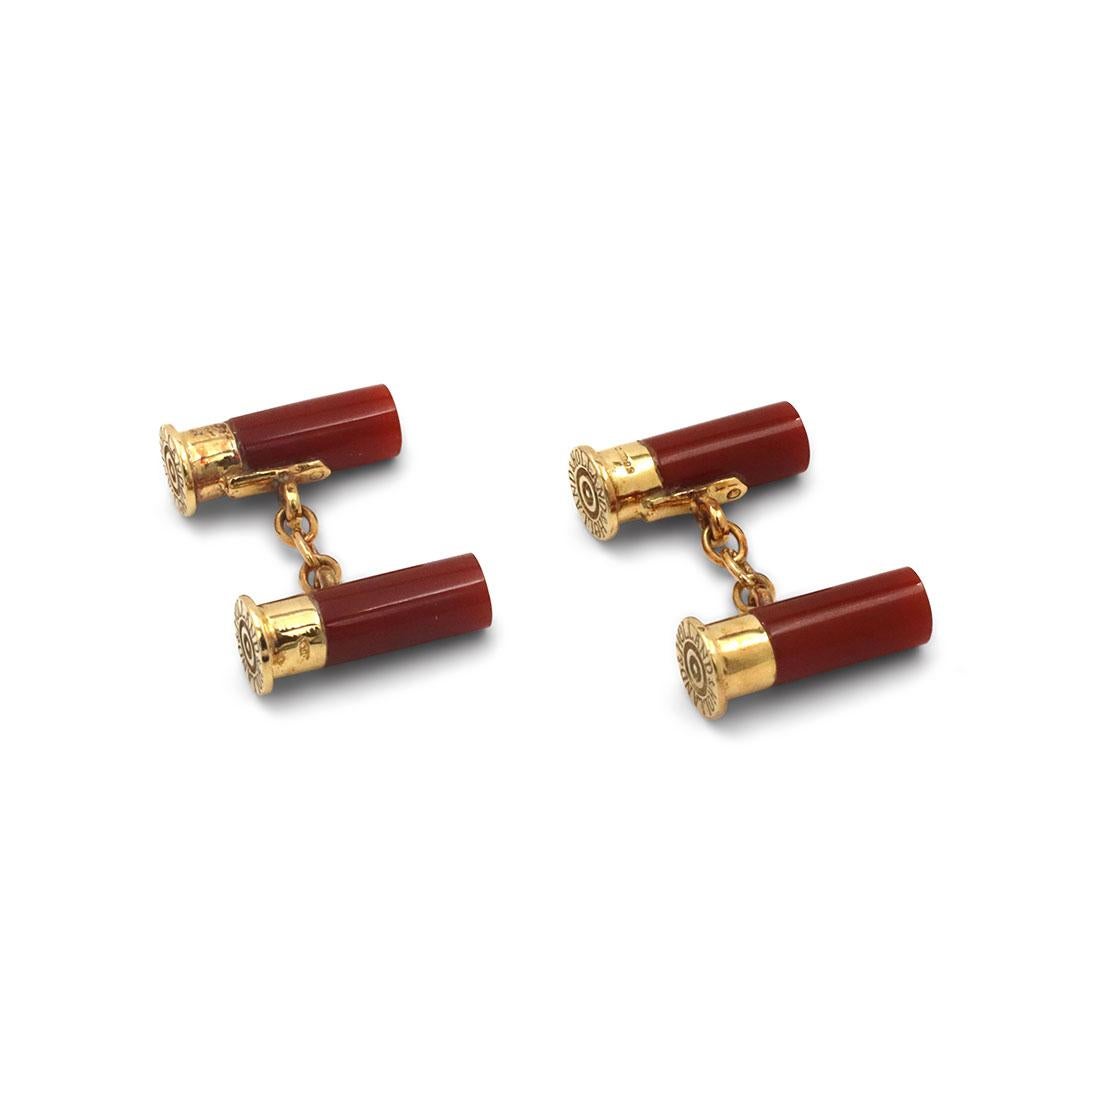 Authentic Holland & Holland cufflinks crafted in 18 karat yellow gold. These unique cufflinks take the design of shotgun bullets. The top portion is crafted in gold and stamped Holland & Holland while the bottom half is set with carnelian. Stamped